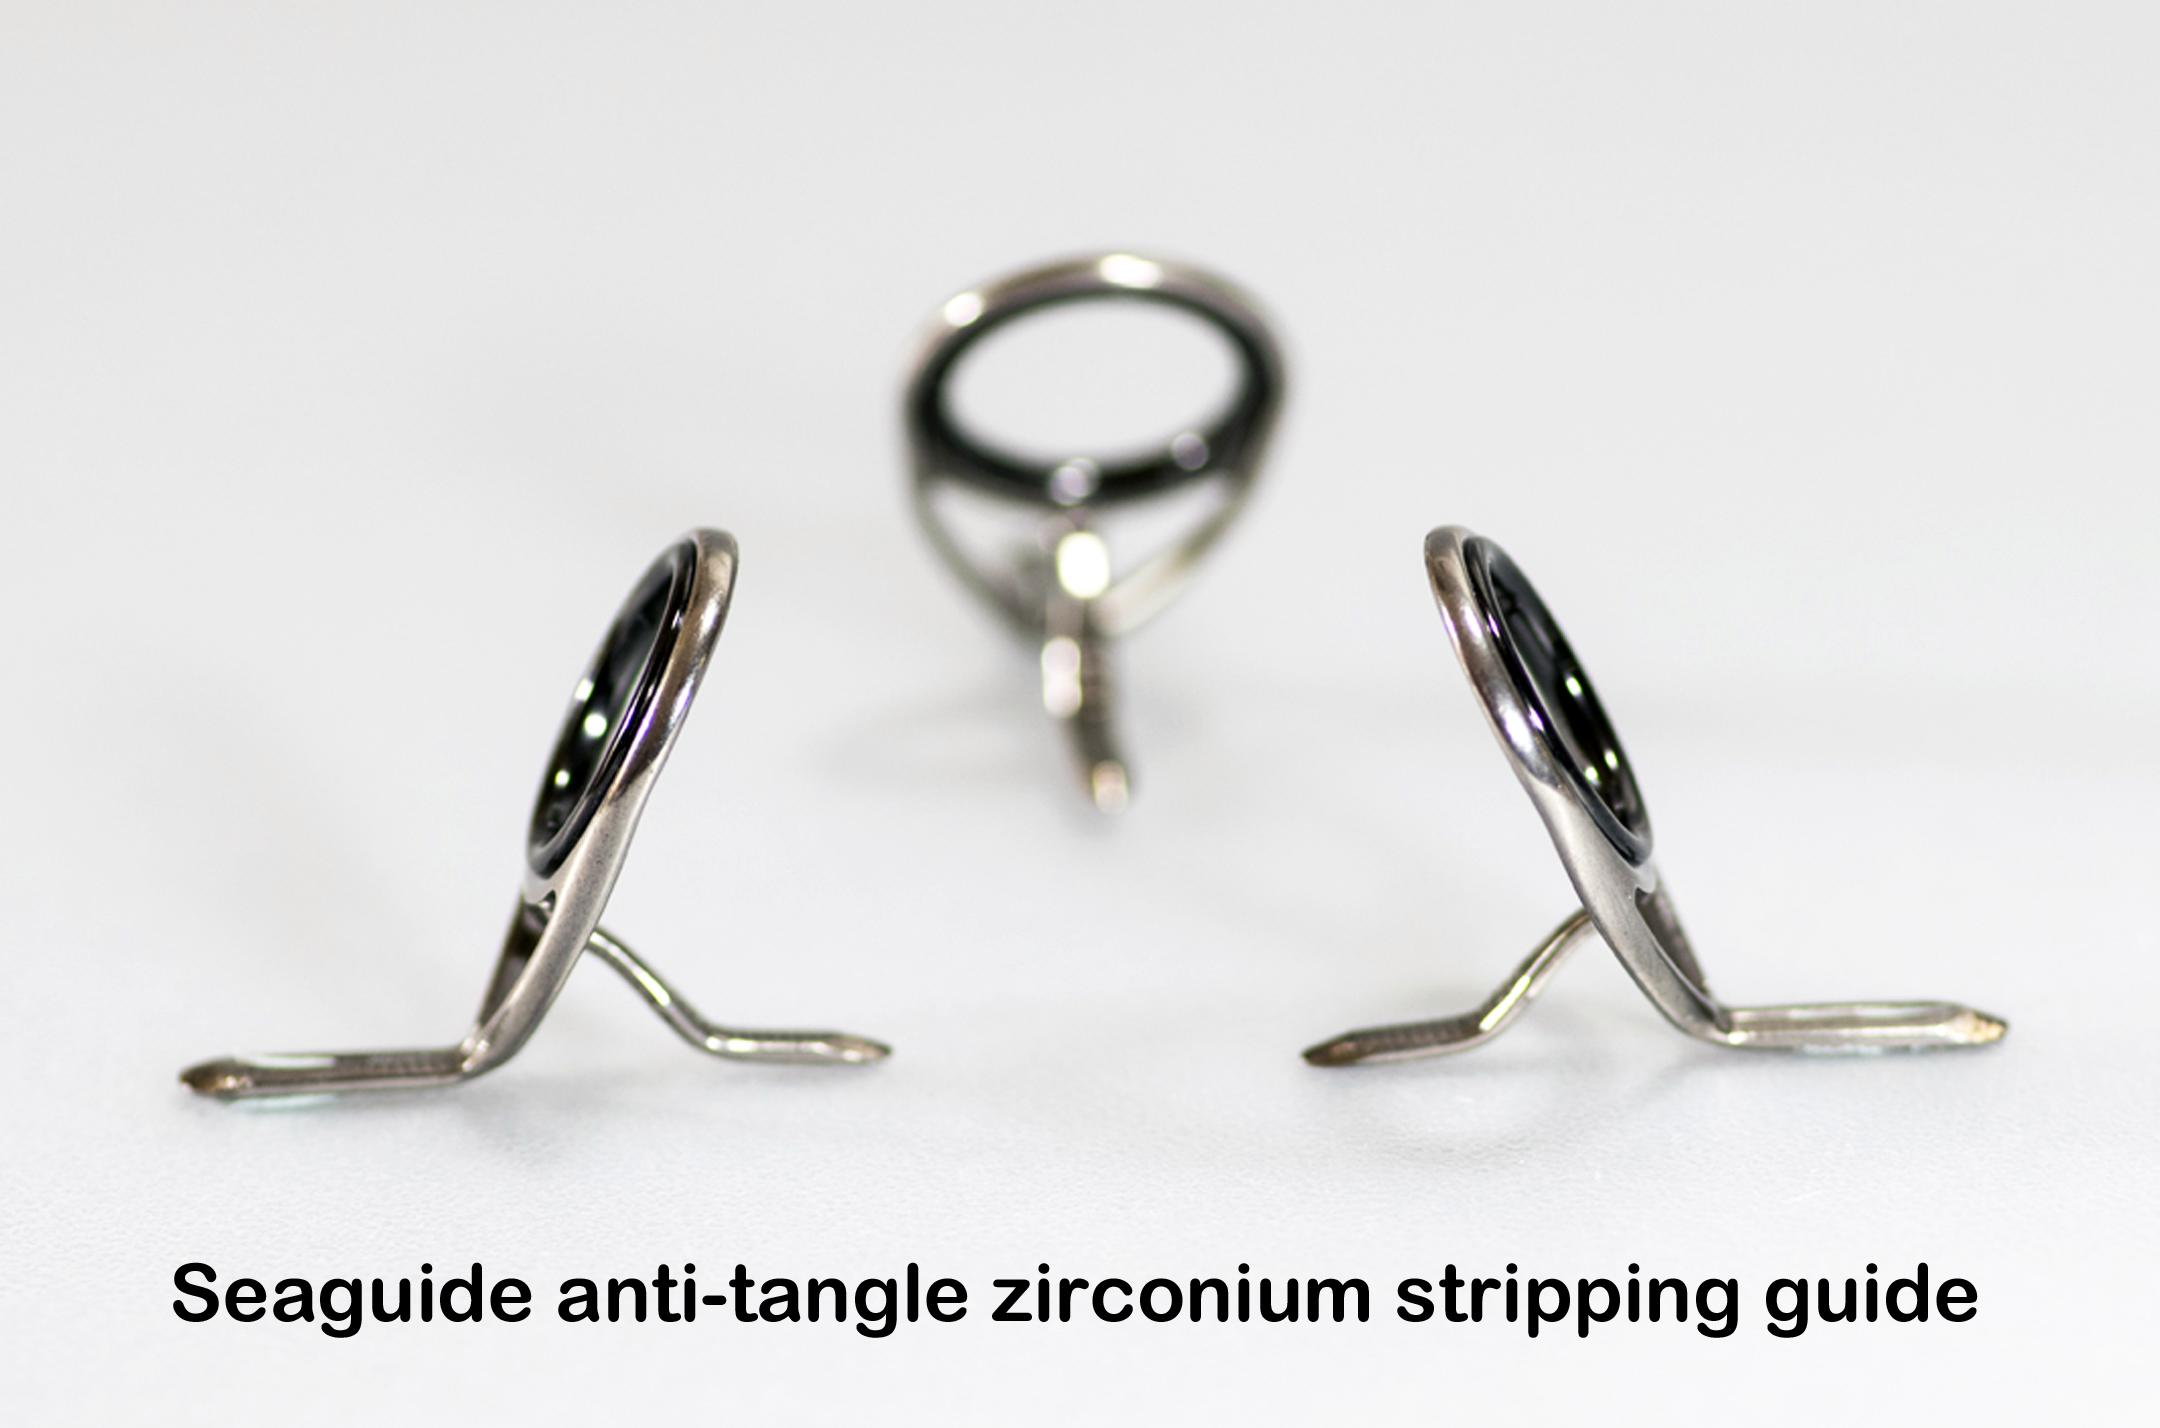 Anti tangle stripping guide